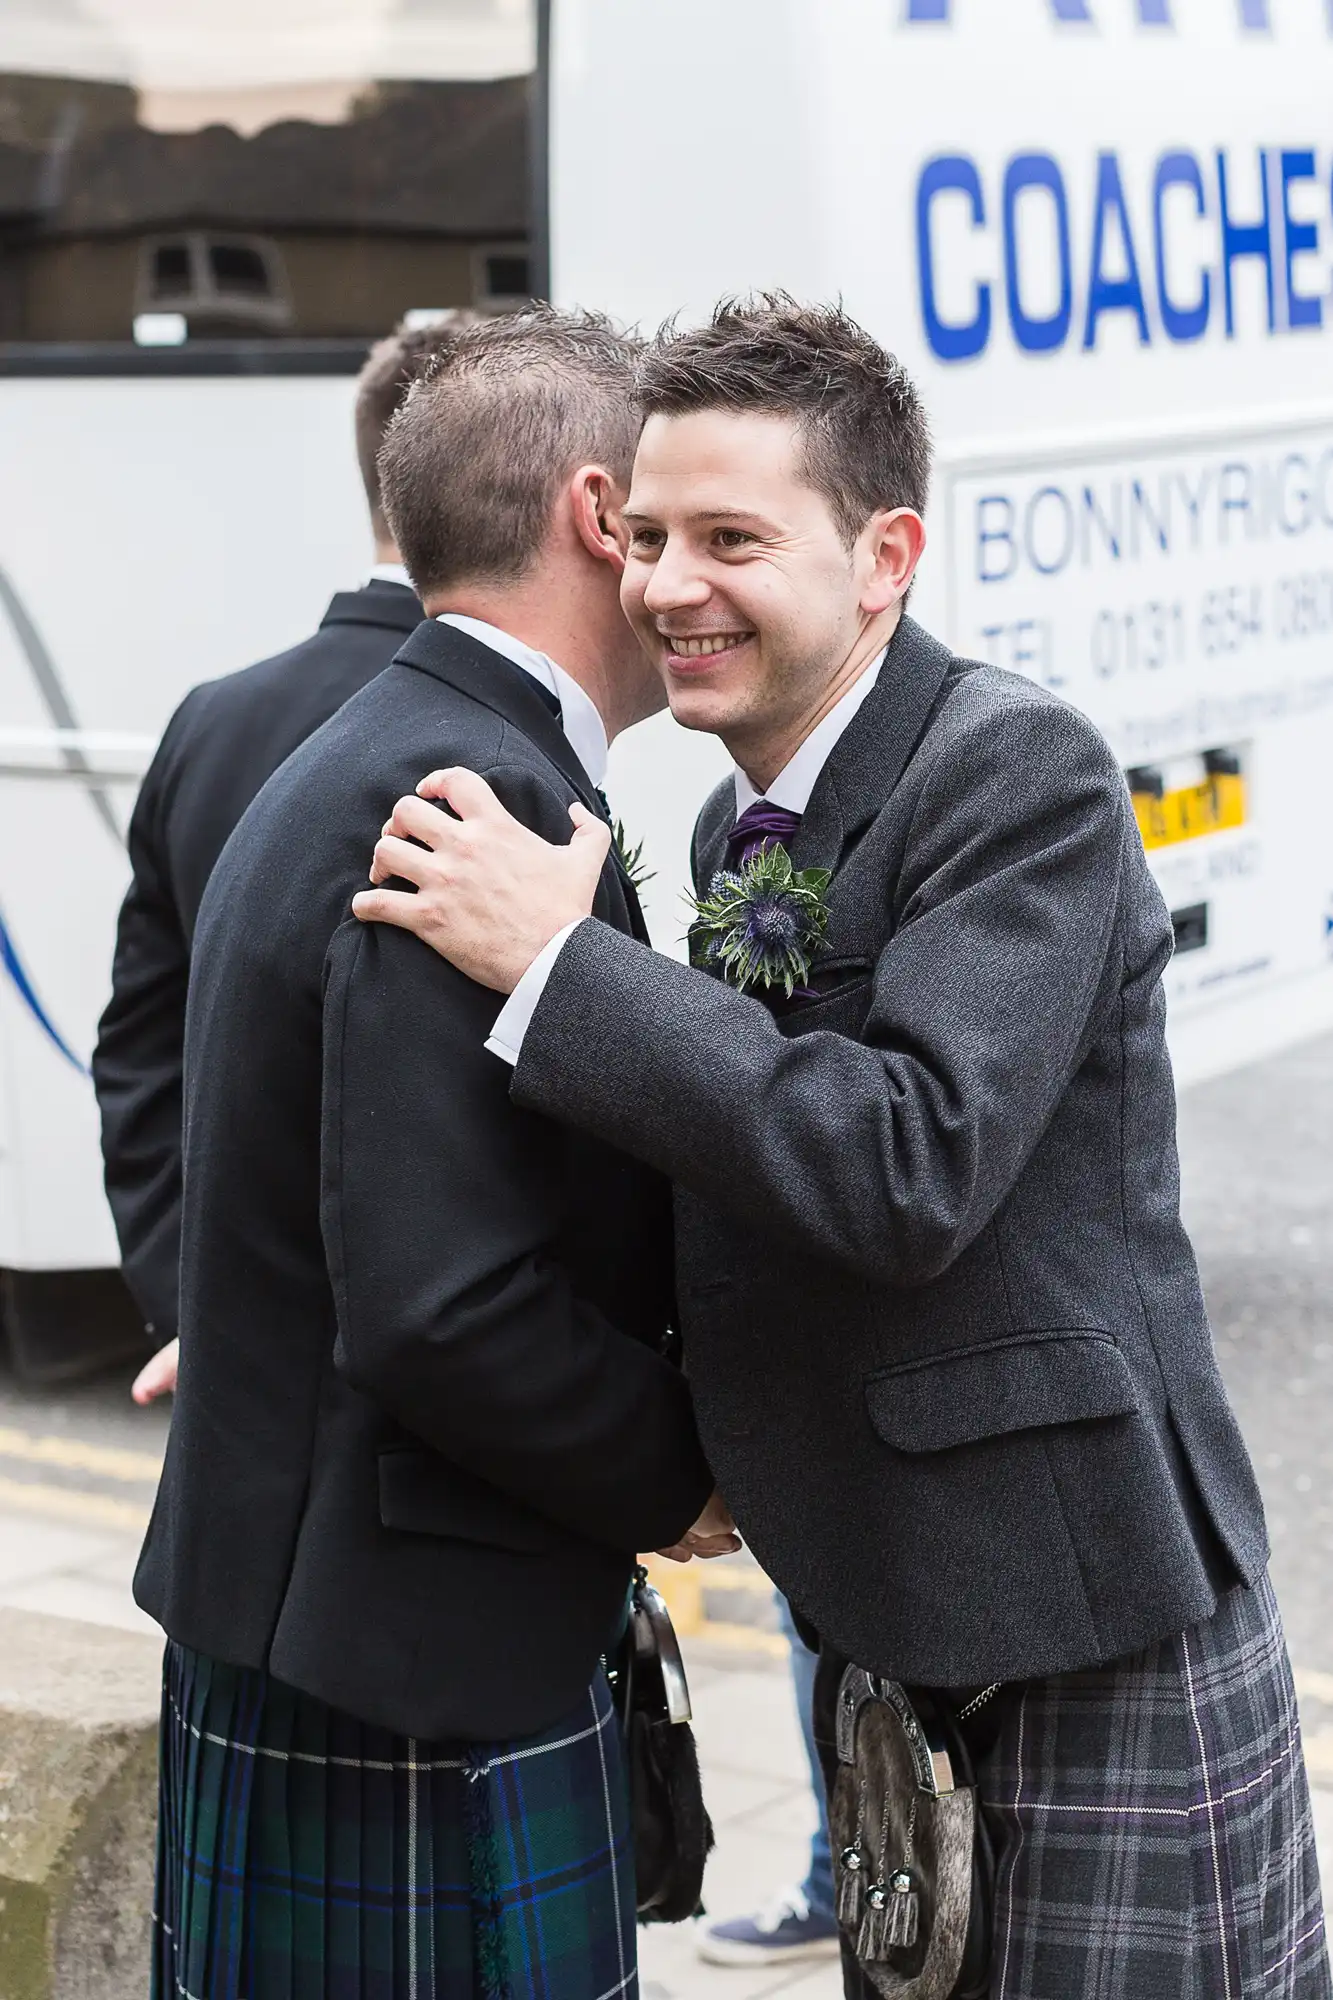 Two men in kilts embracing and smiling at a festive event, one adjusting the other's boutonniere.